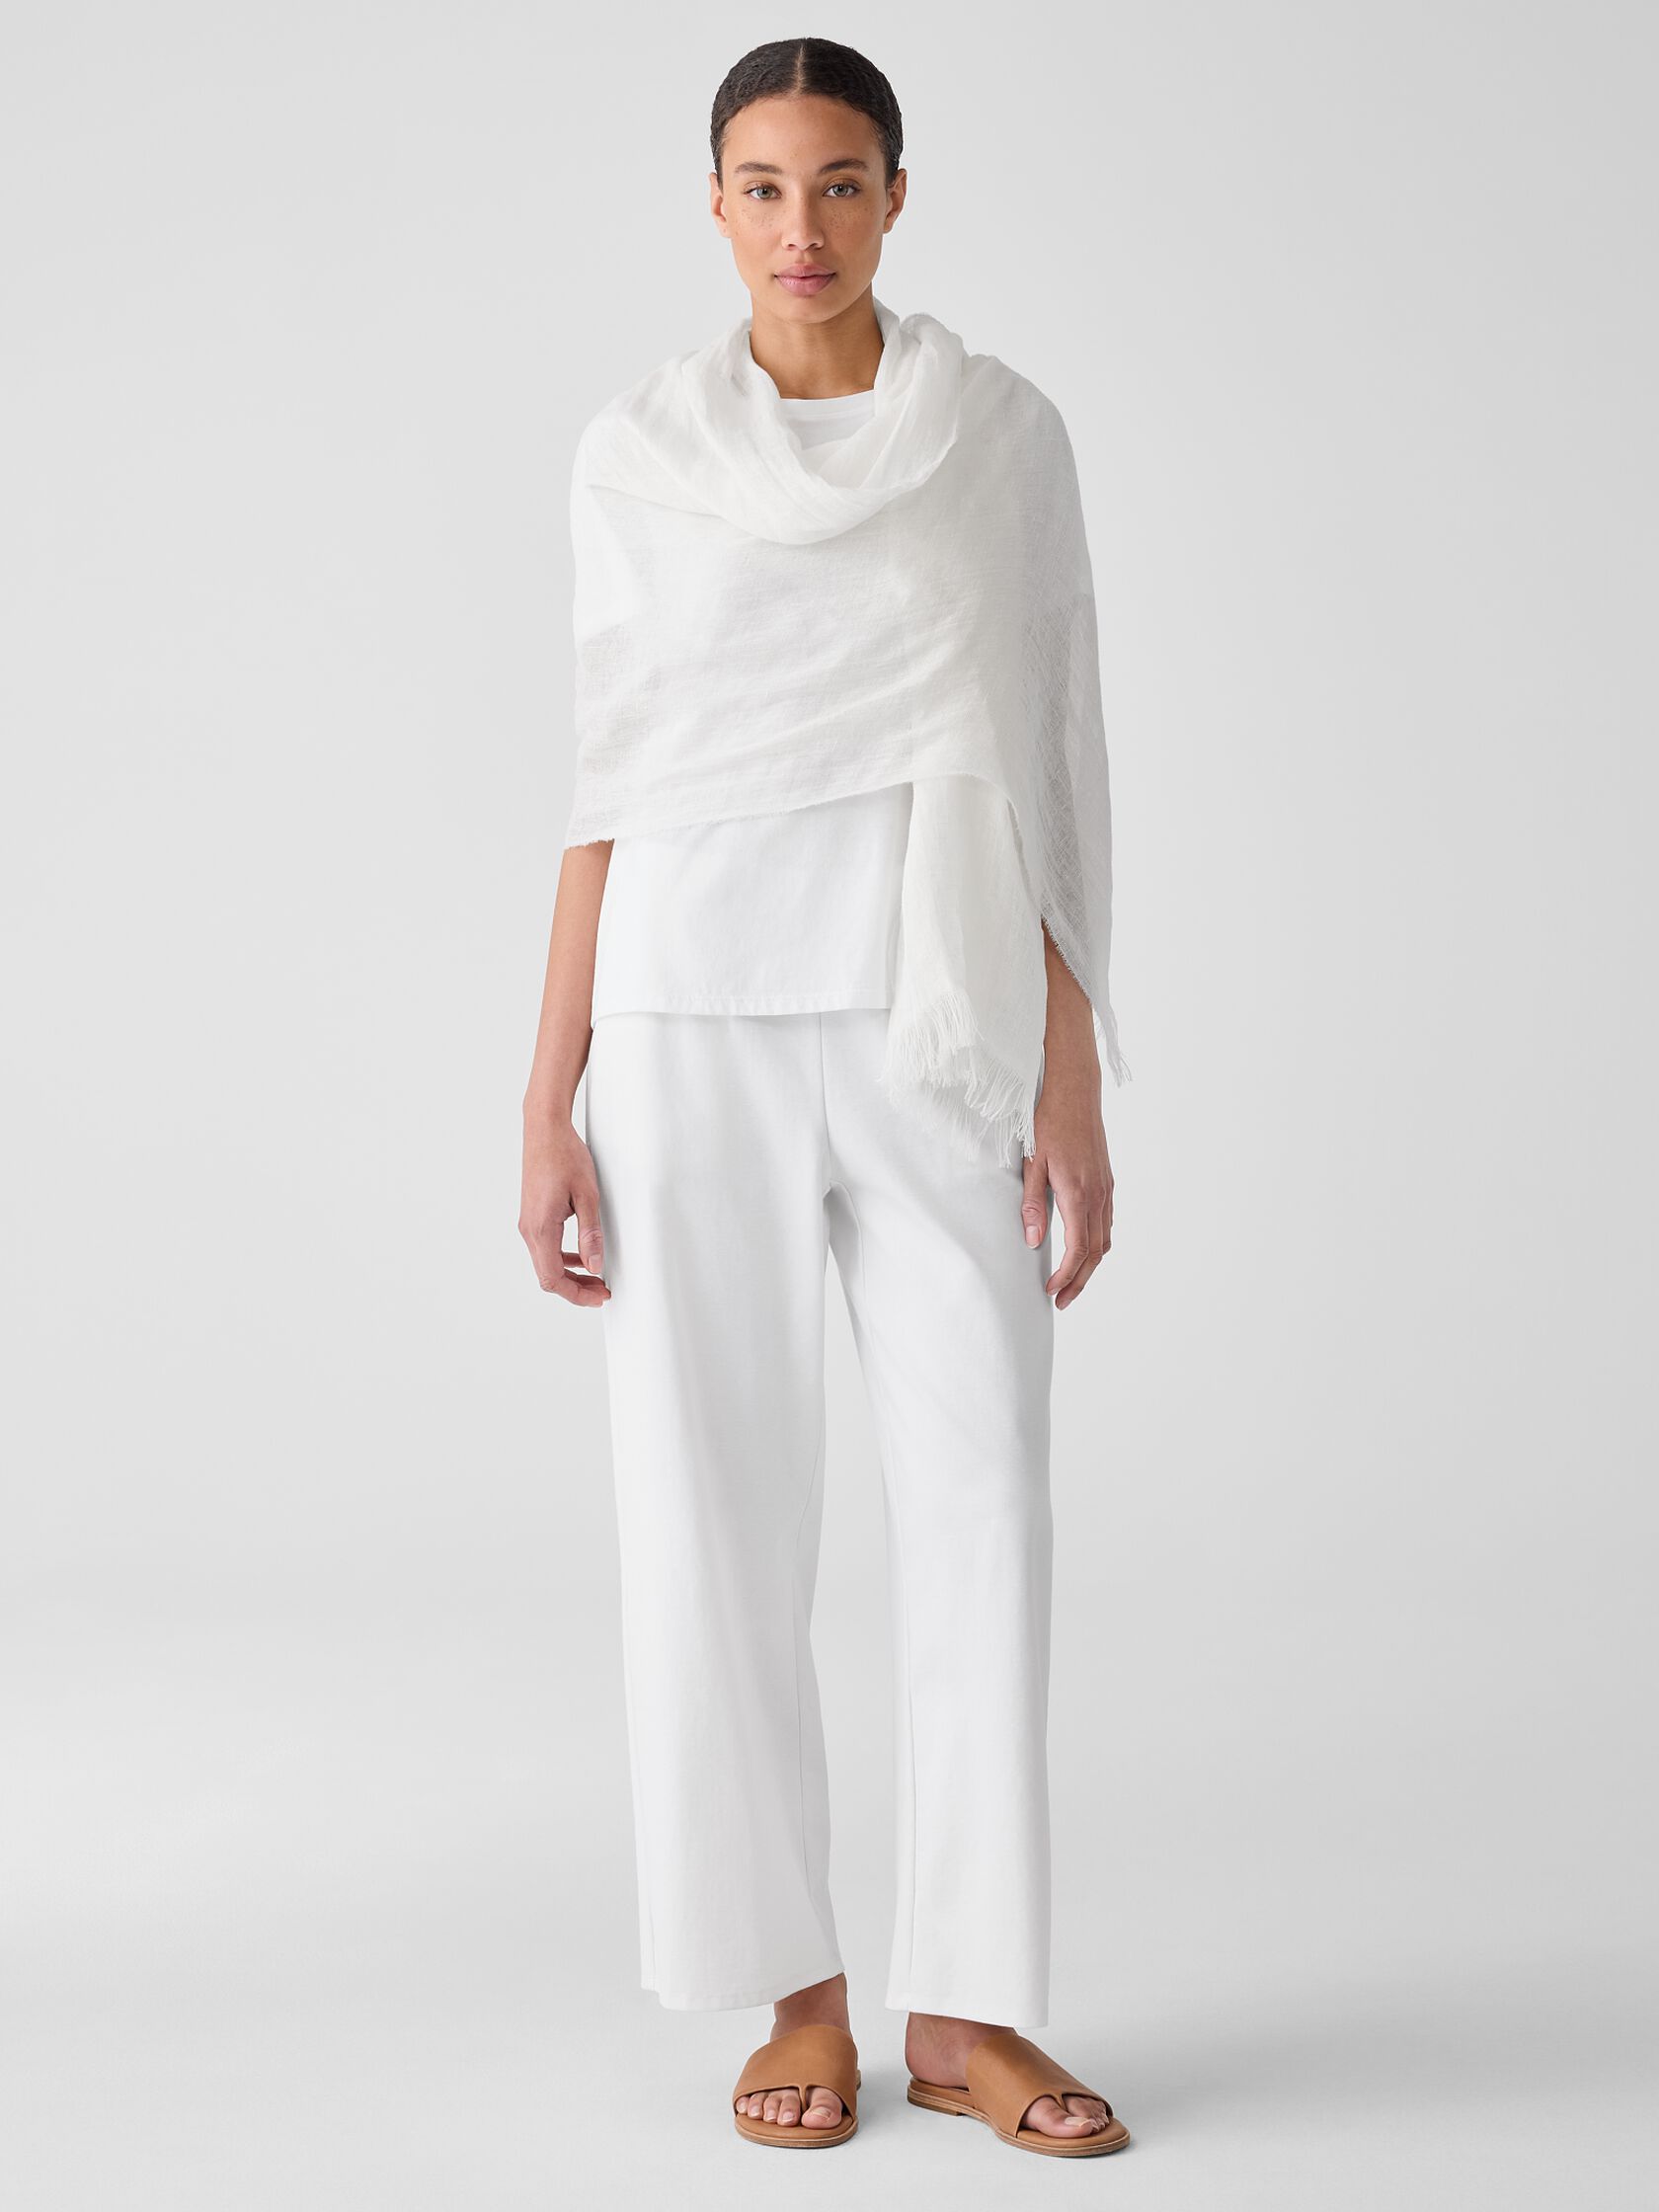 Airy Linen Scarf